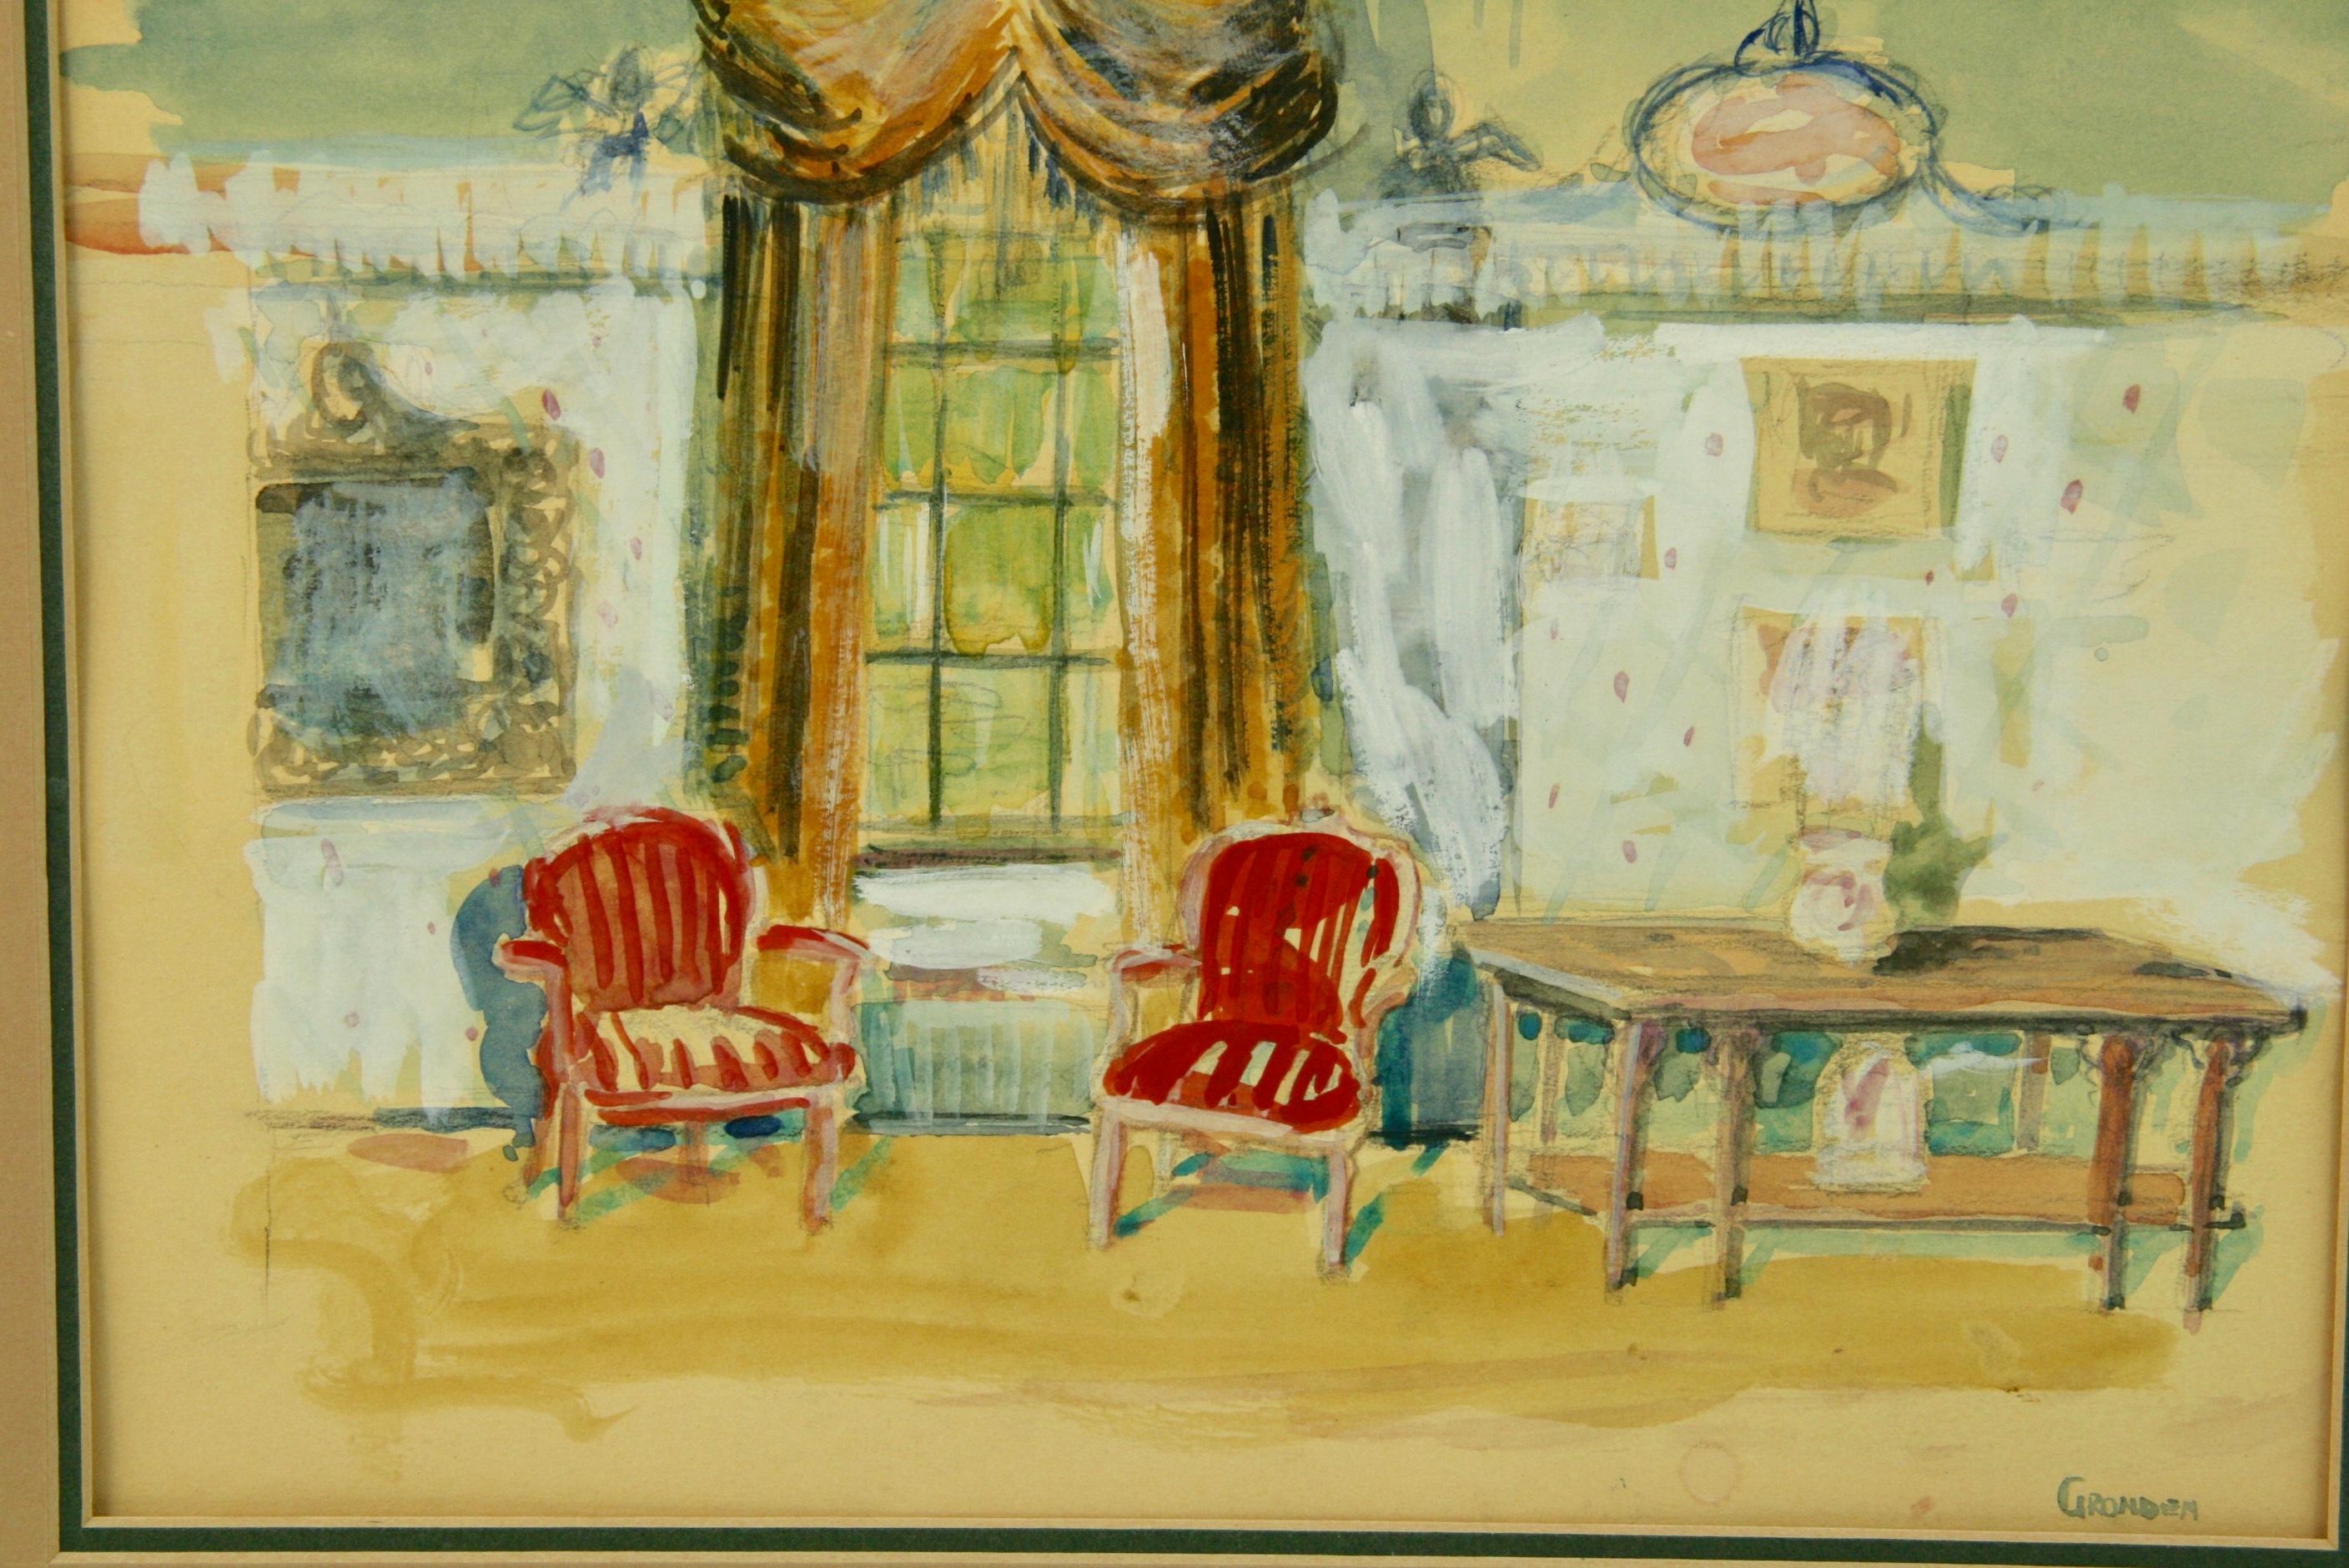 Gouache on paper of a designers interior rendering, signed by Grondein
Set in a 16x20